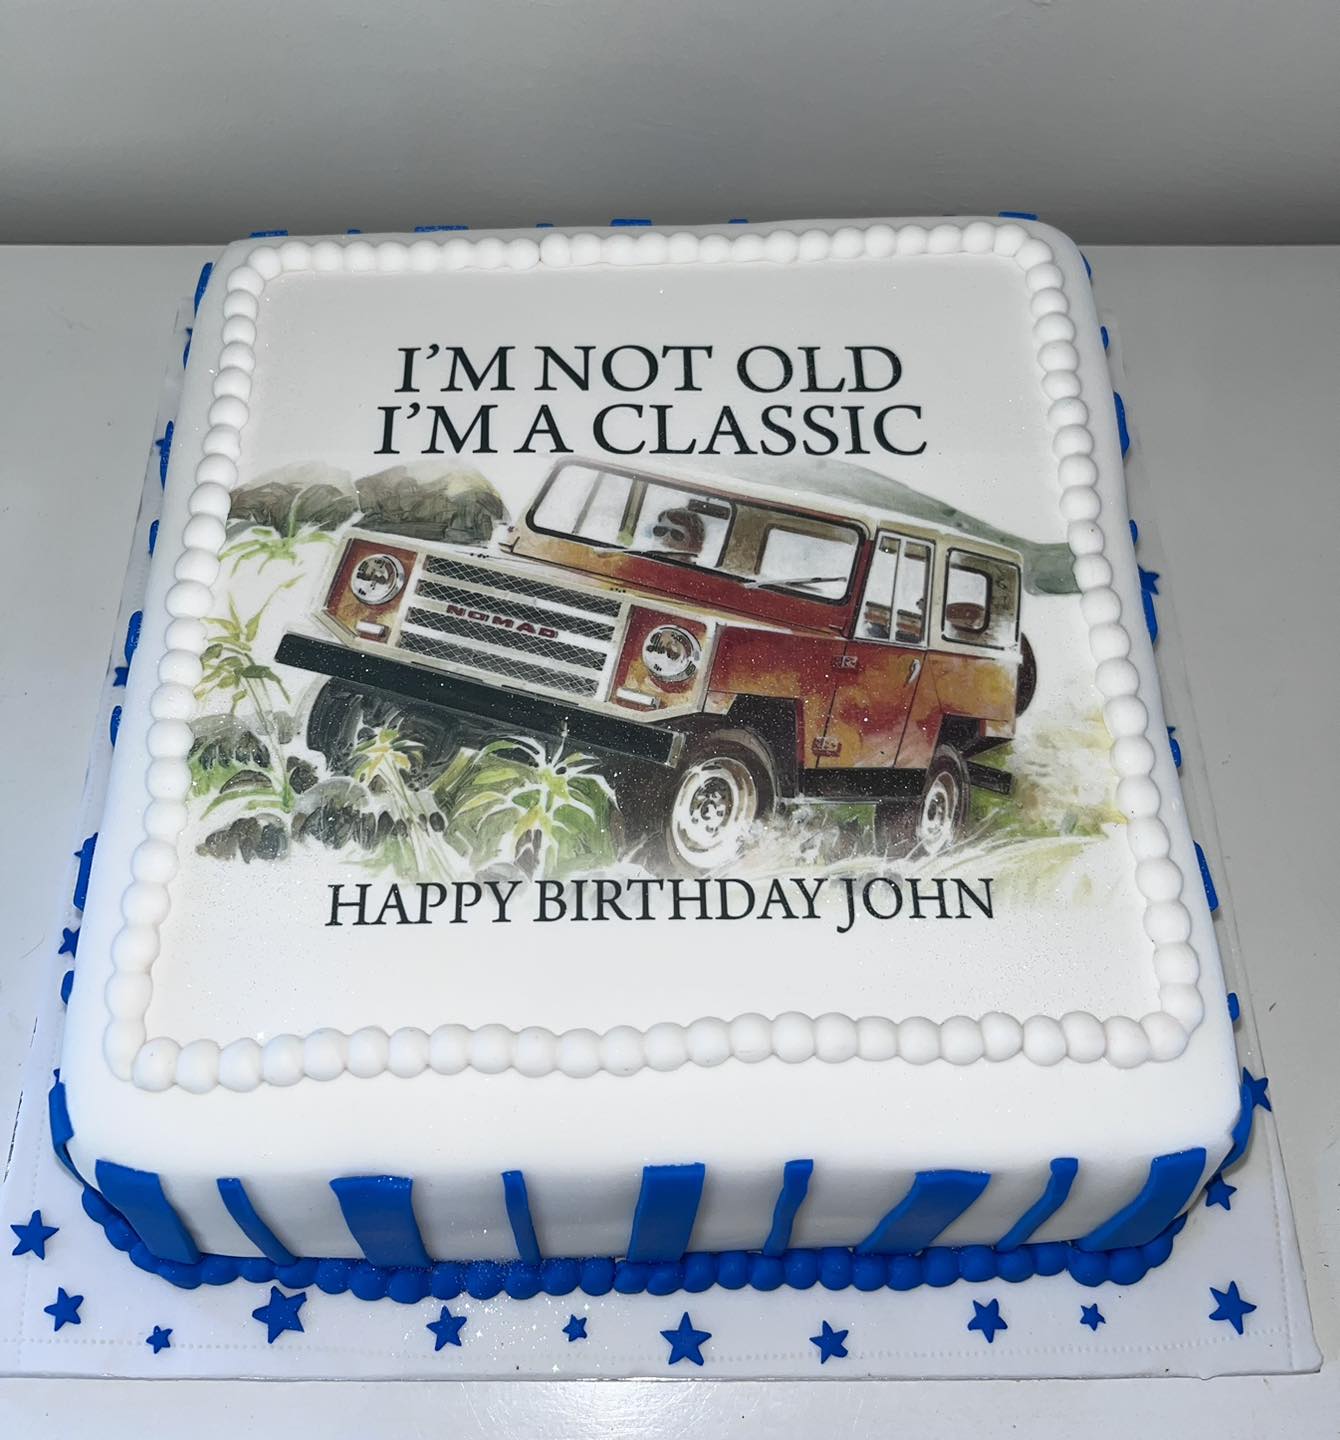 80th birthday cake, corporate cakes, birthday cakes, cake, cape town cakes, novelty cakes, southern peninsula, cakes for kids